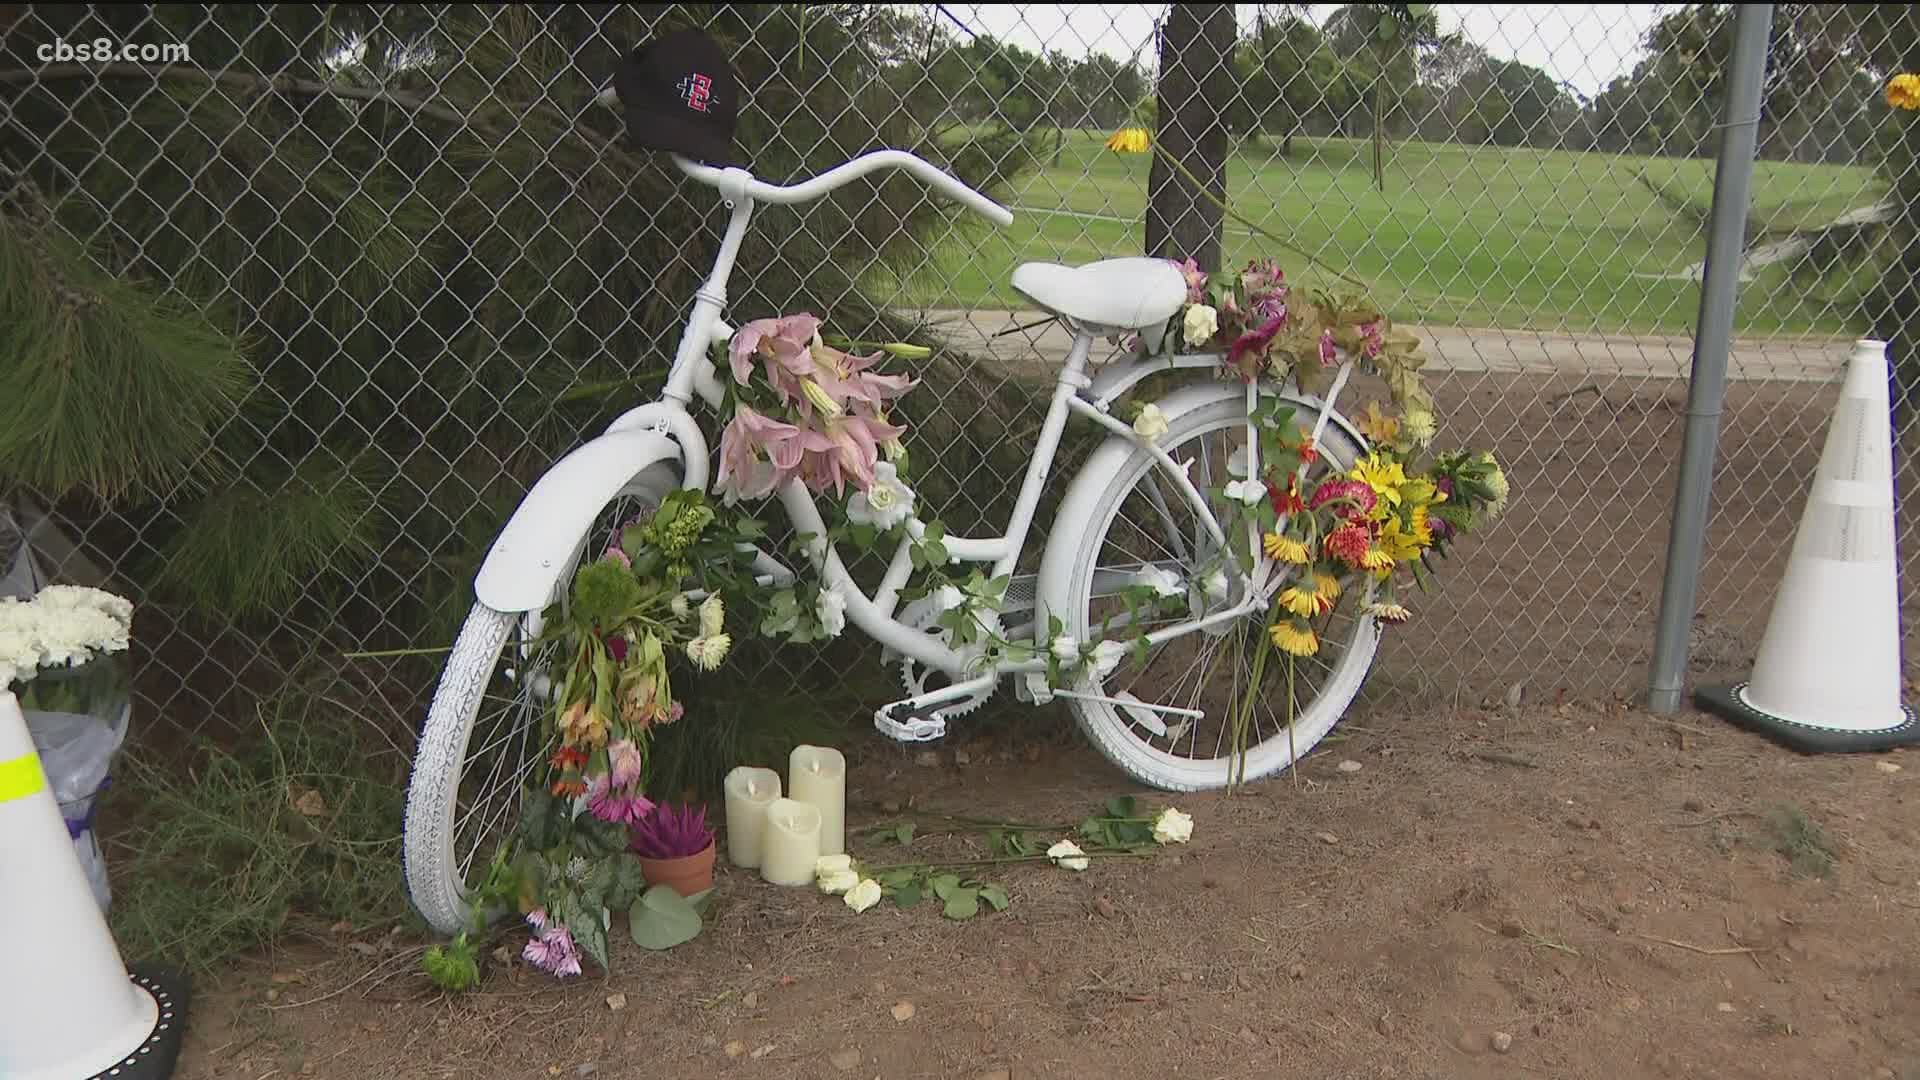 This year, 12 people have died on our roads in San Diego County while riding their bikes.